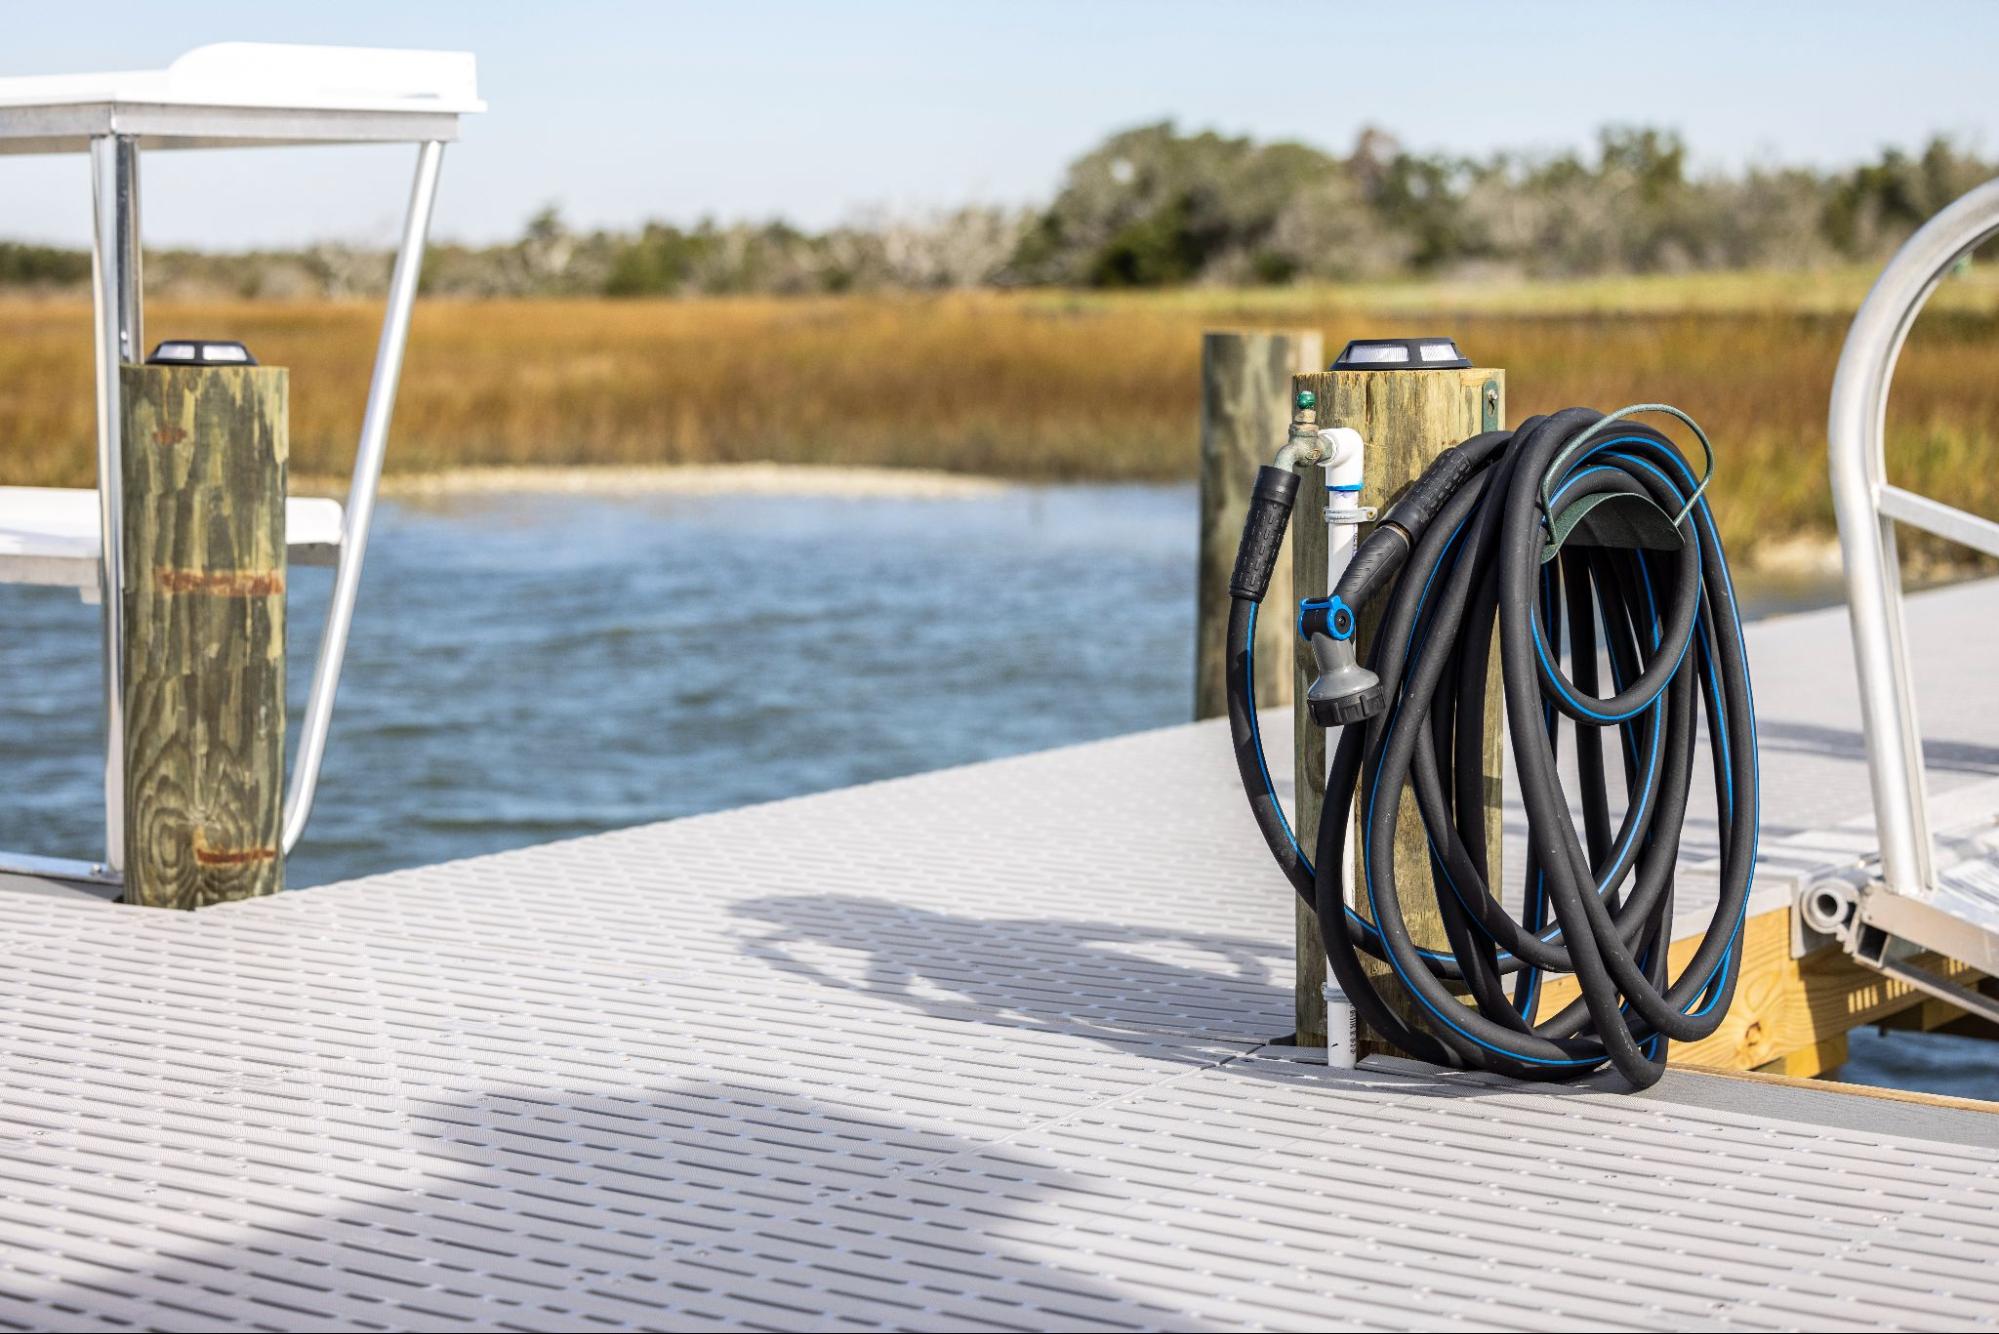 The photo depicts a dock with a body of water and a marsh in the background. In the foreground, there is a black, coiled-up hose. 